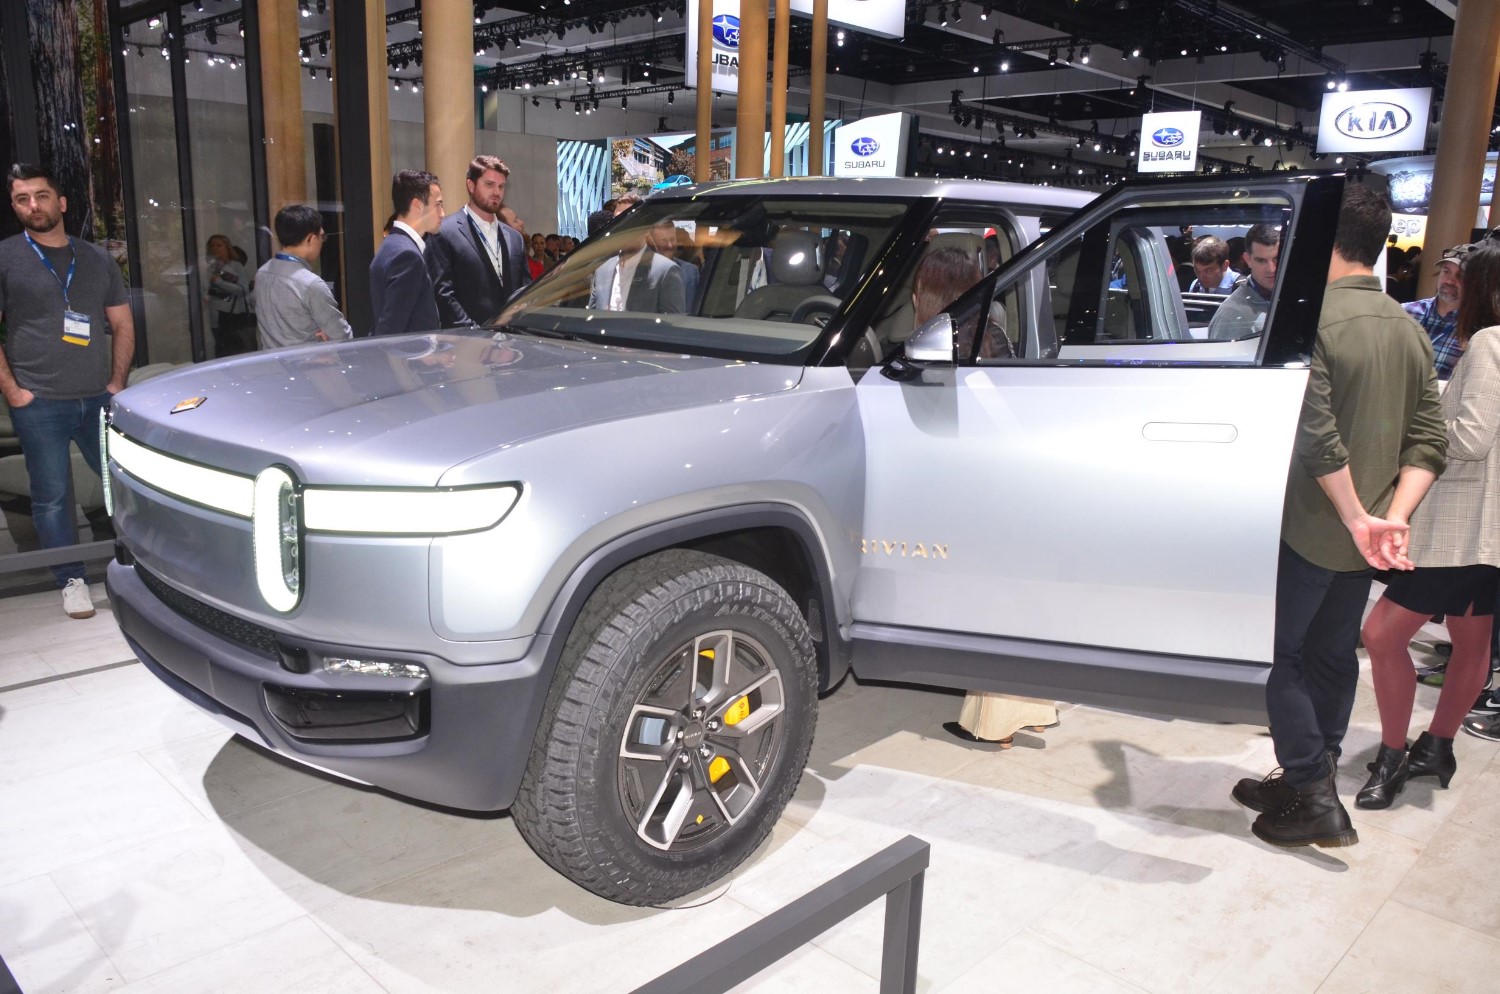 Rivian will soon soon start selling their own EVs as well